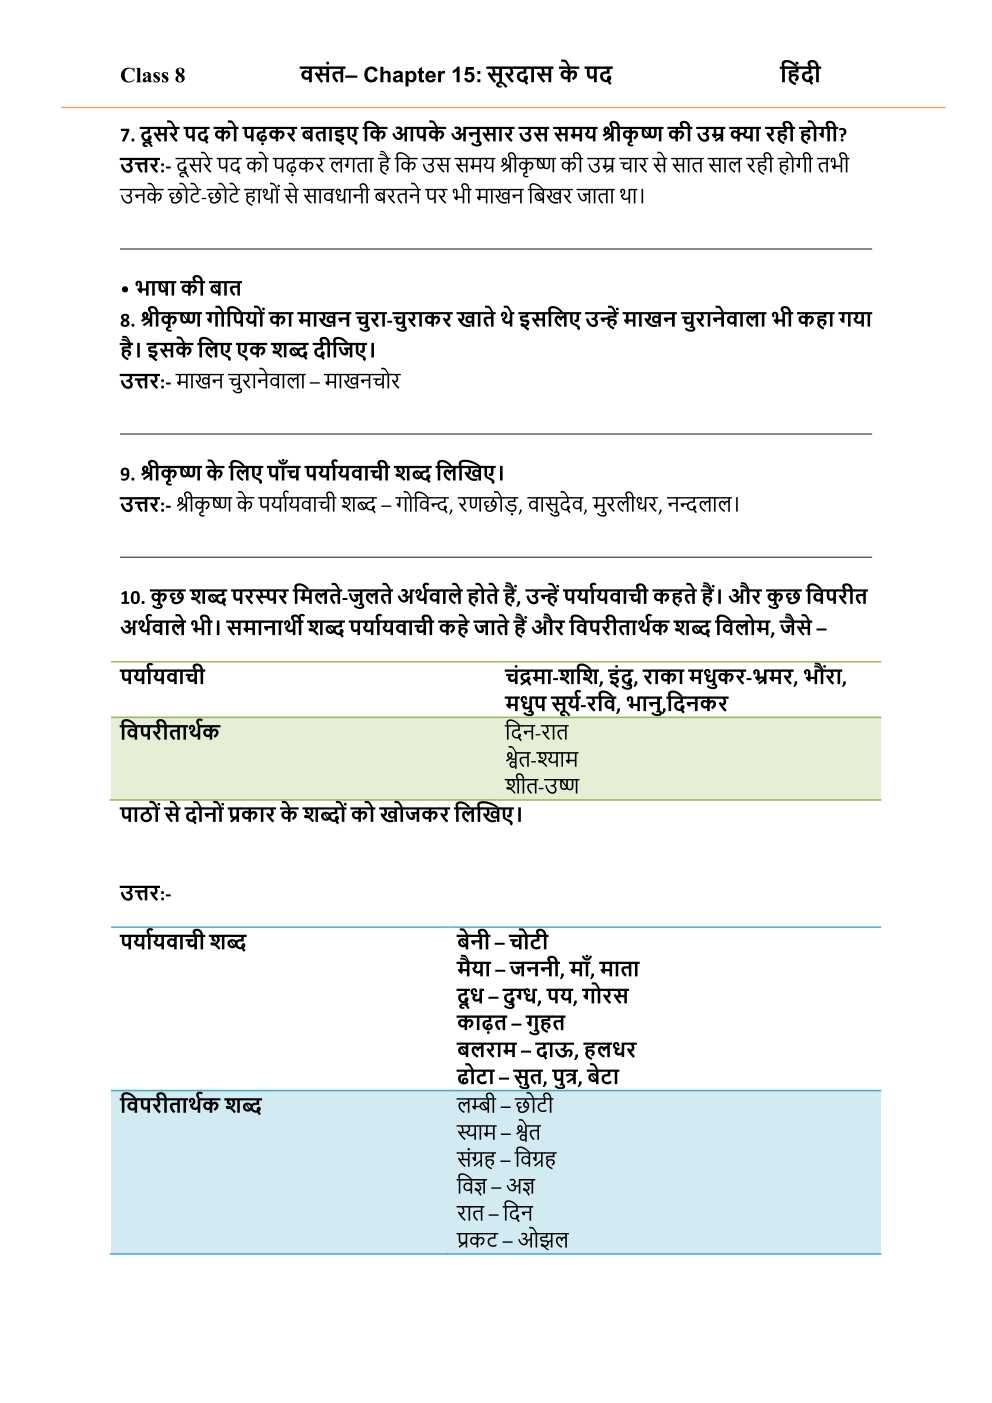 NCERT Solutions For Class 8 Hindi Vasant Chapter 15